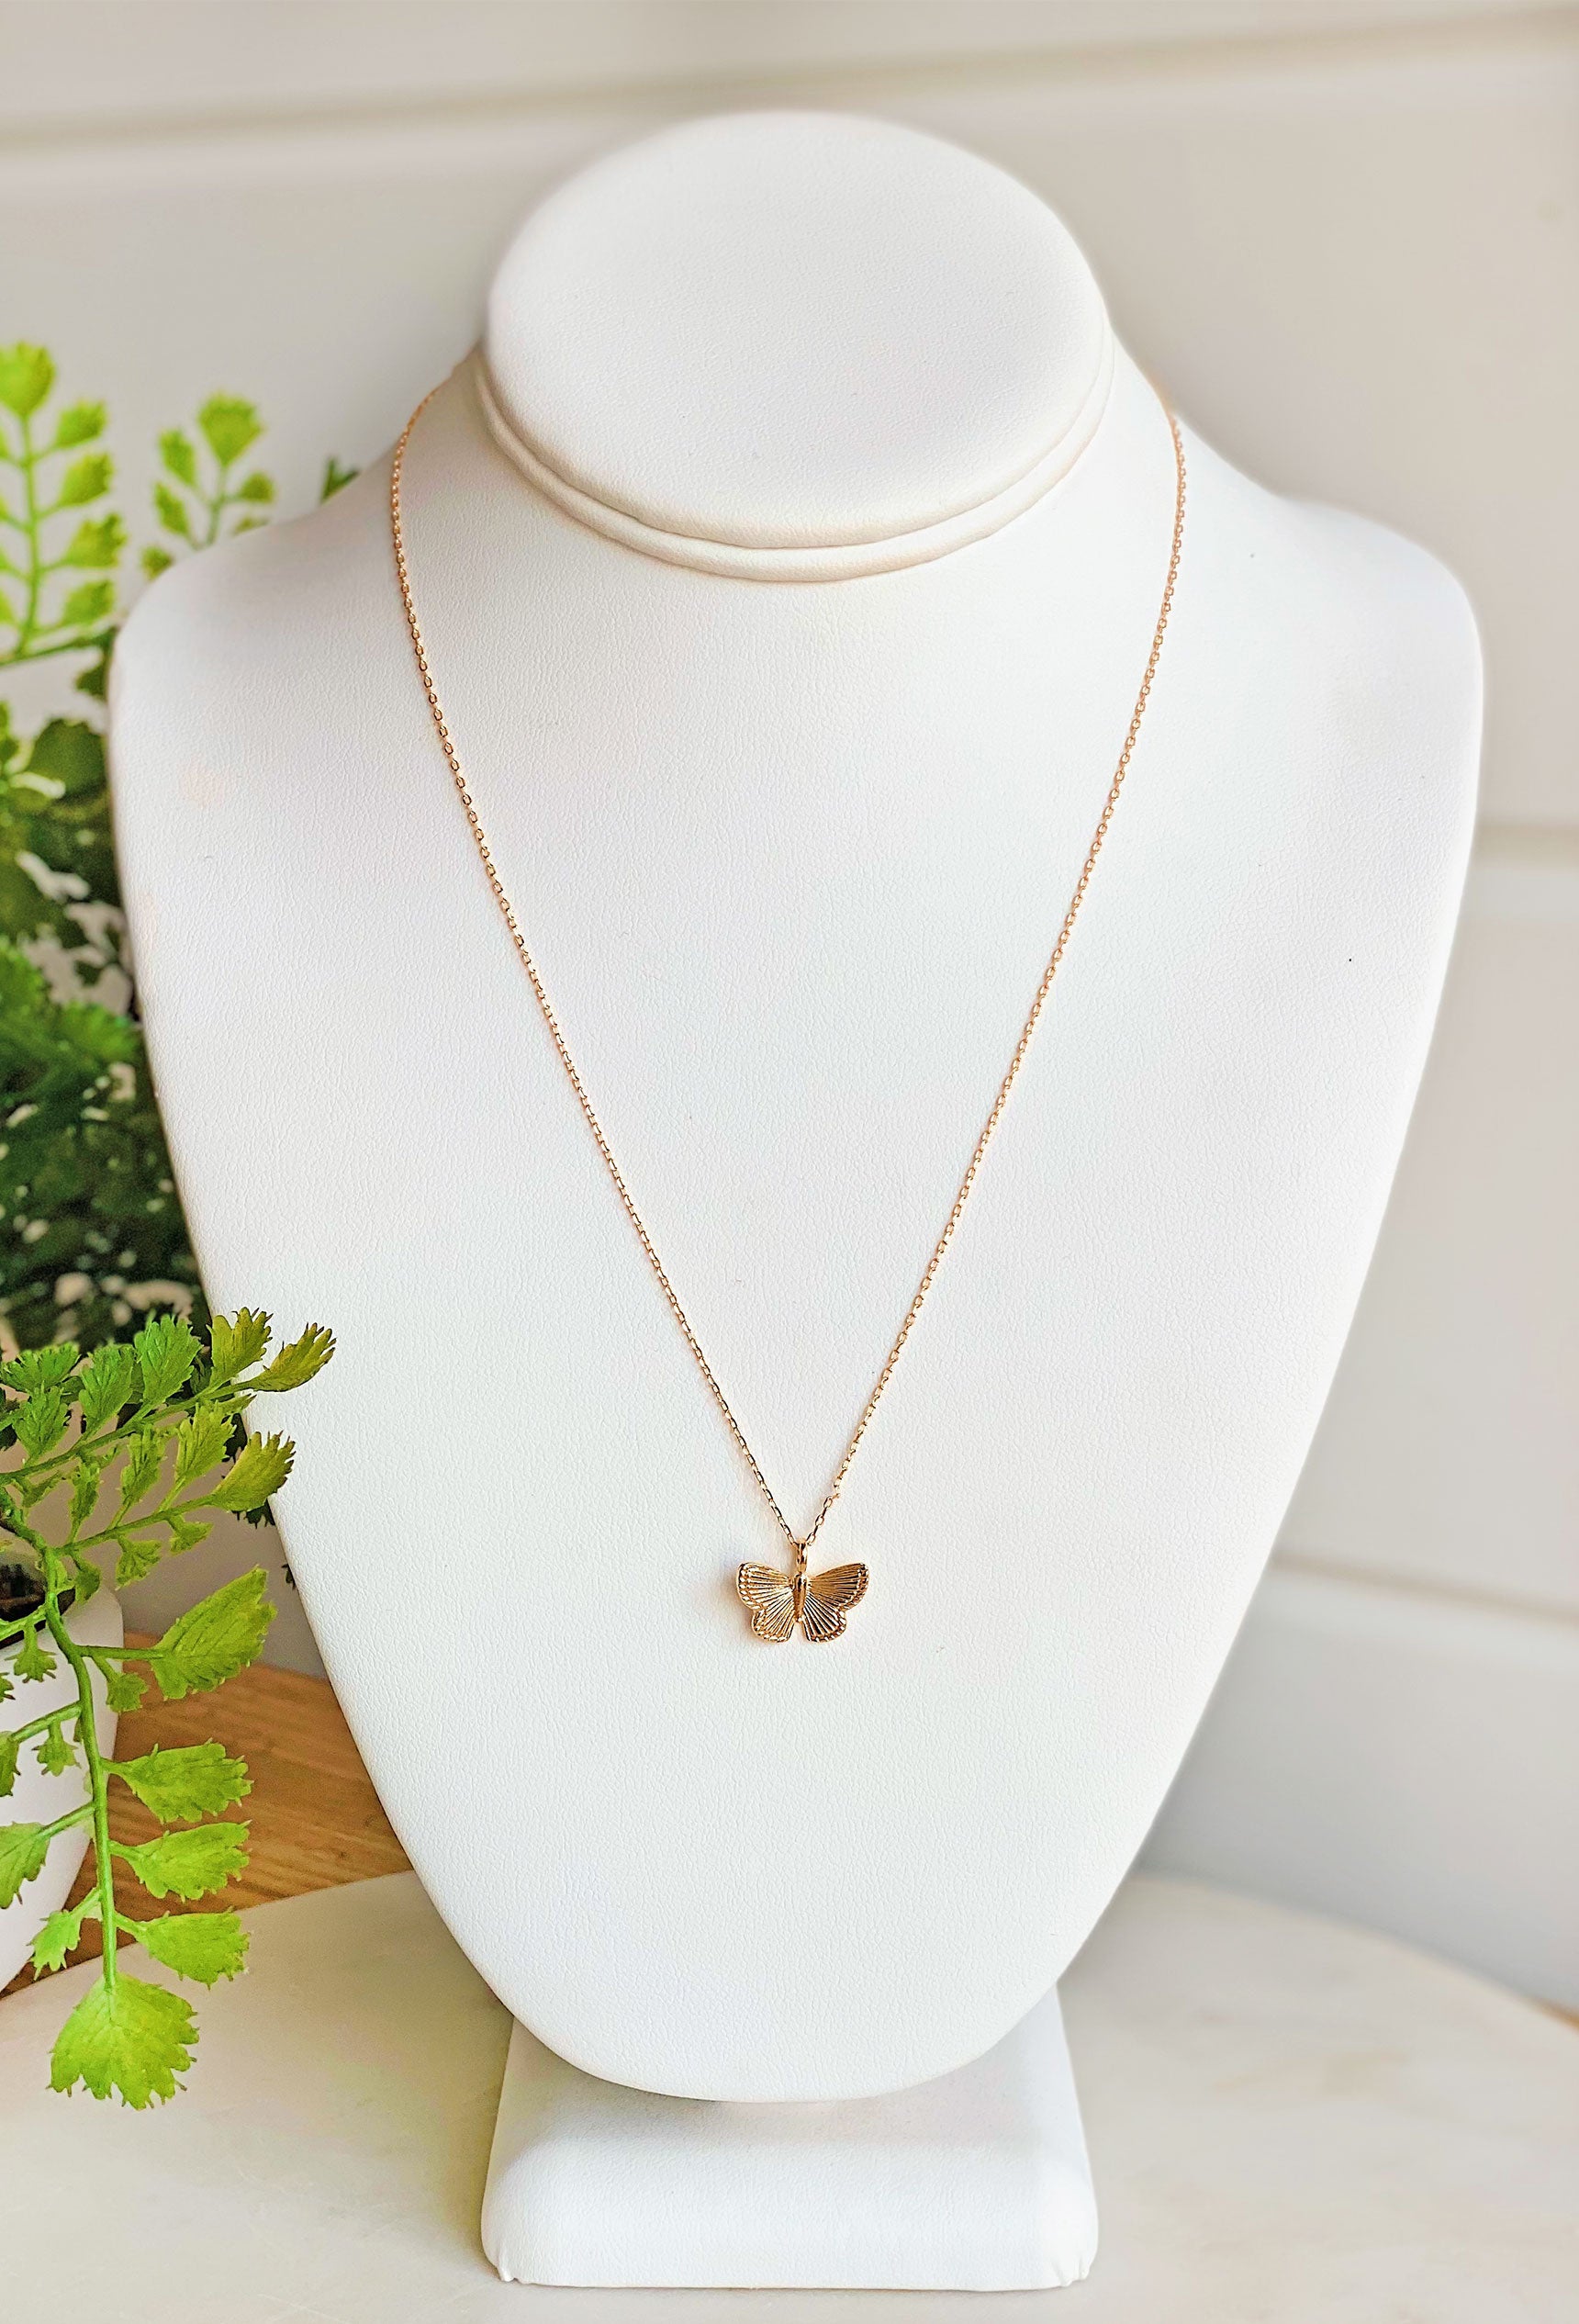 Social Butterfly Necklace, gold dainty necklace with small gold butterfly charm